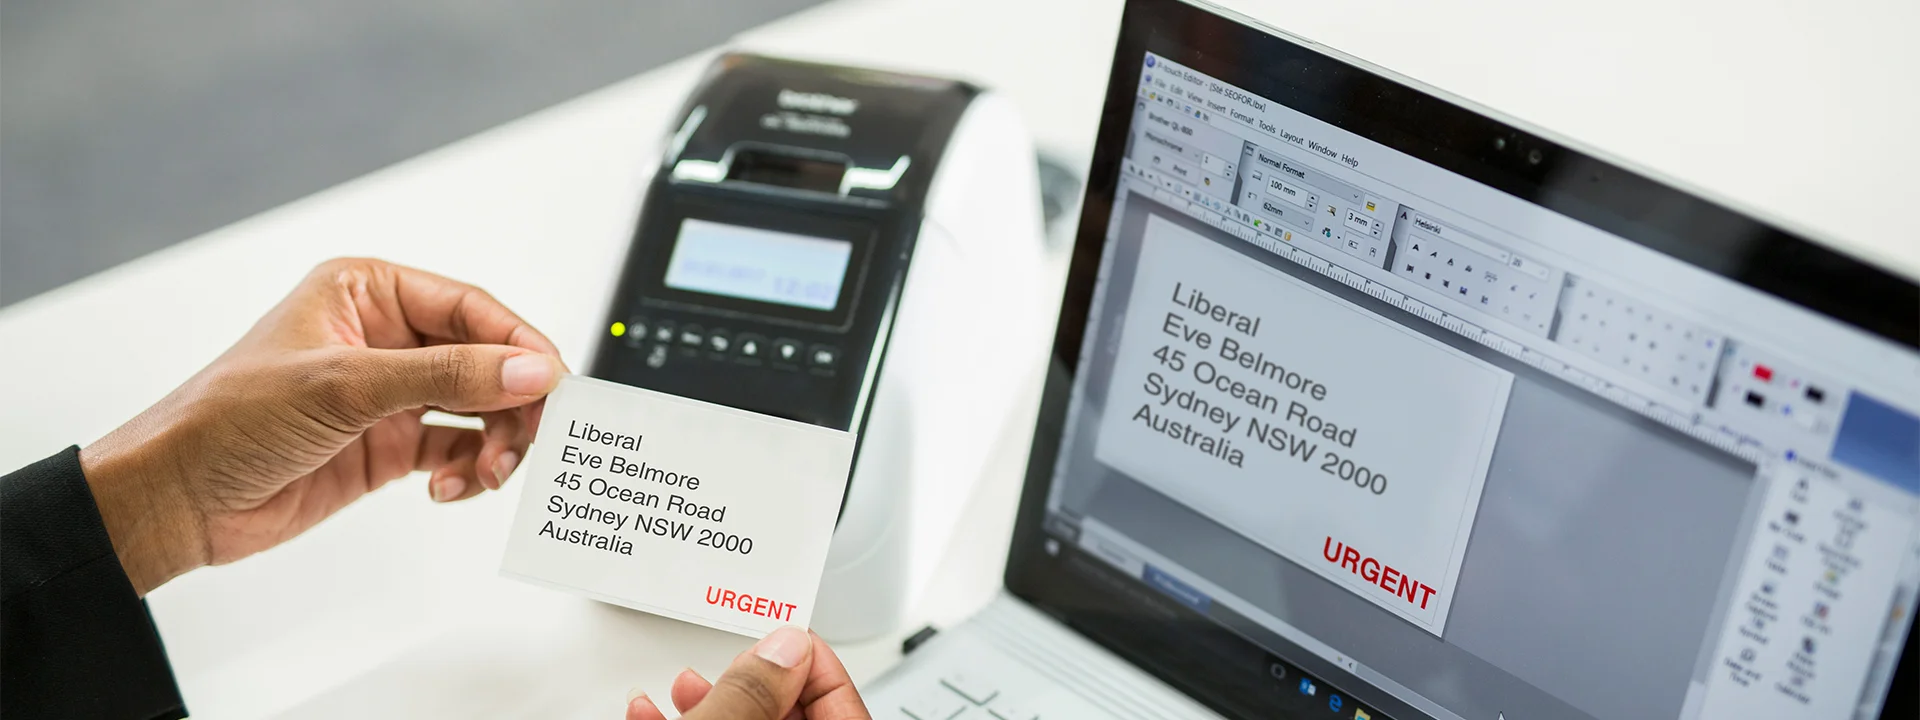 p-touch editor label design software with QL label printer